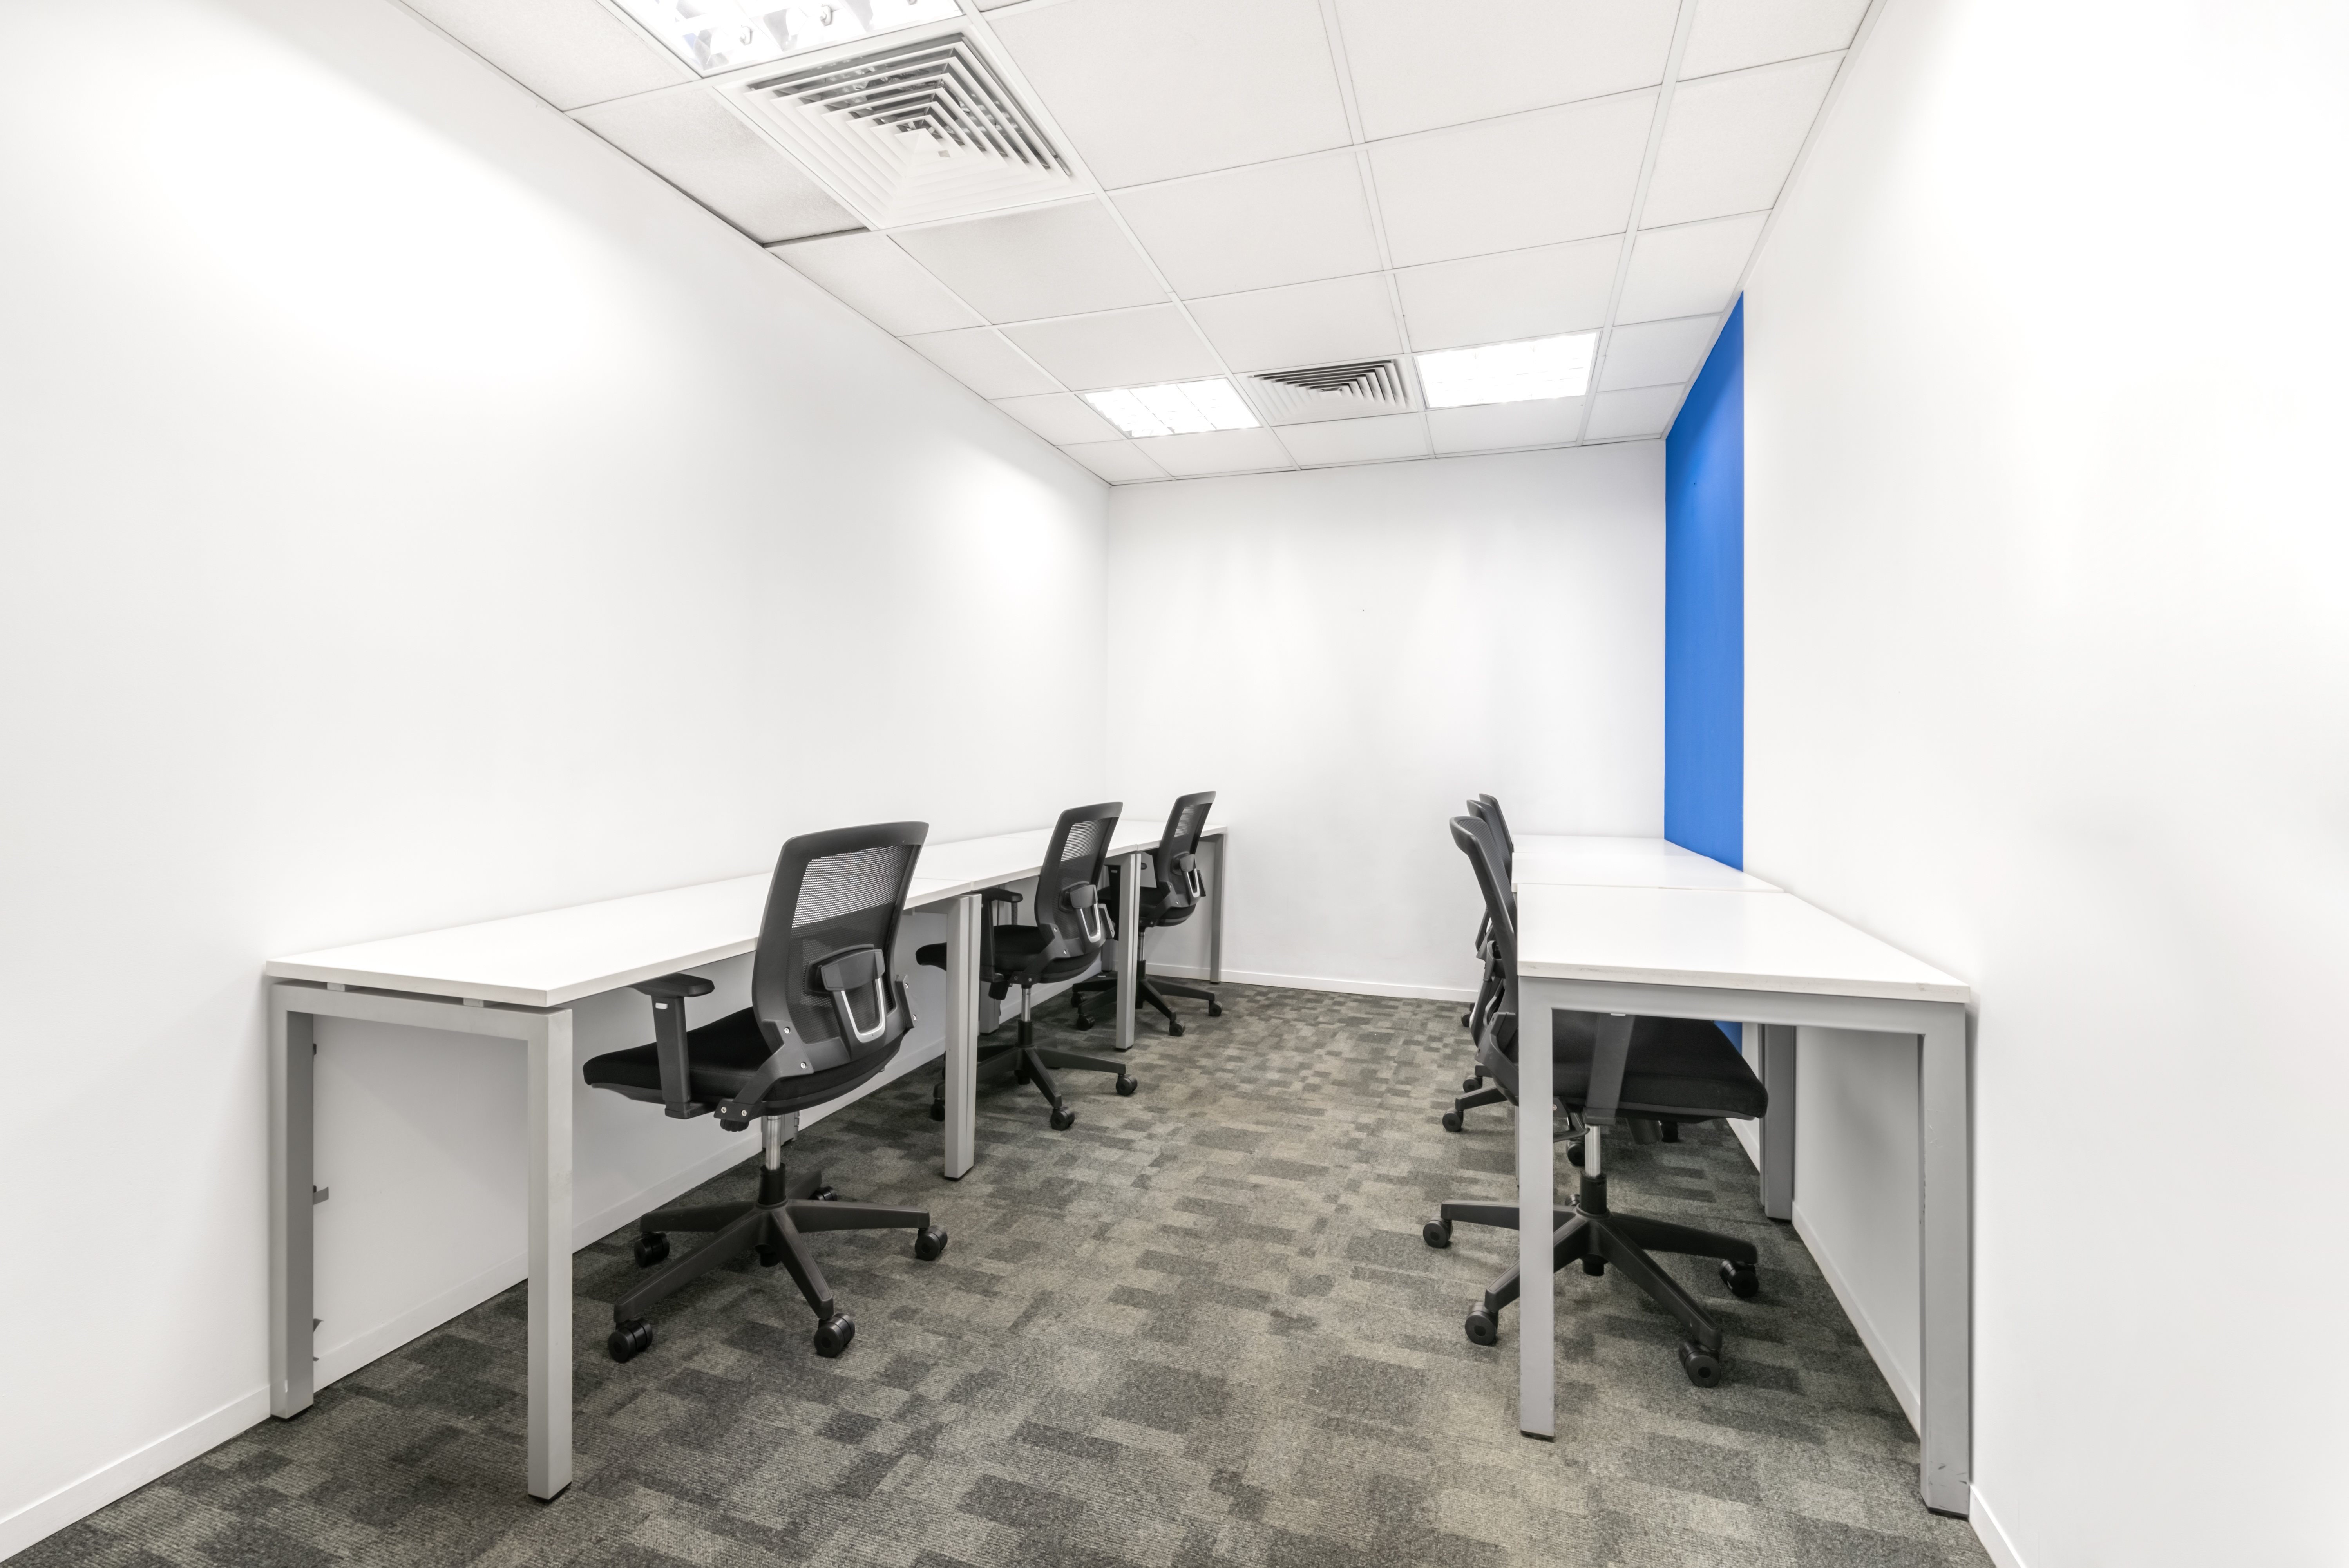 Office Space for Rent Manila | Serviced Offices | Offices to Let